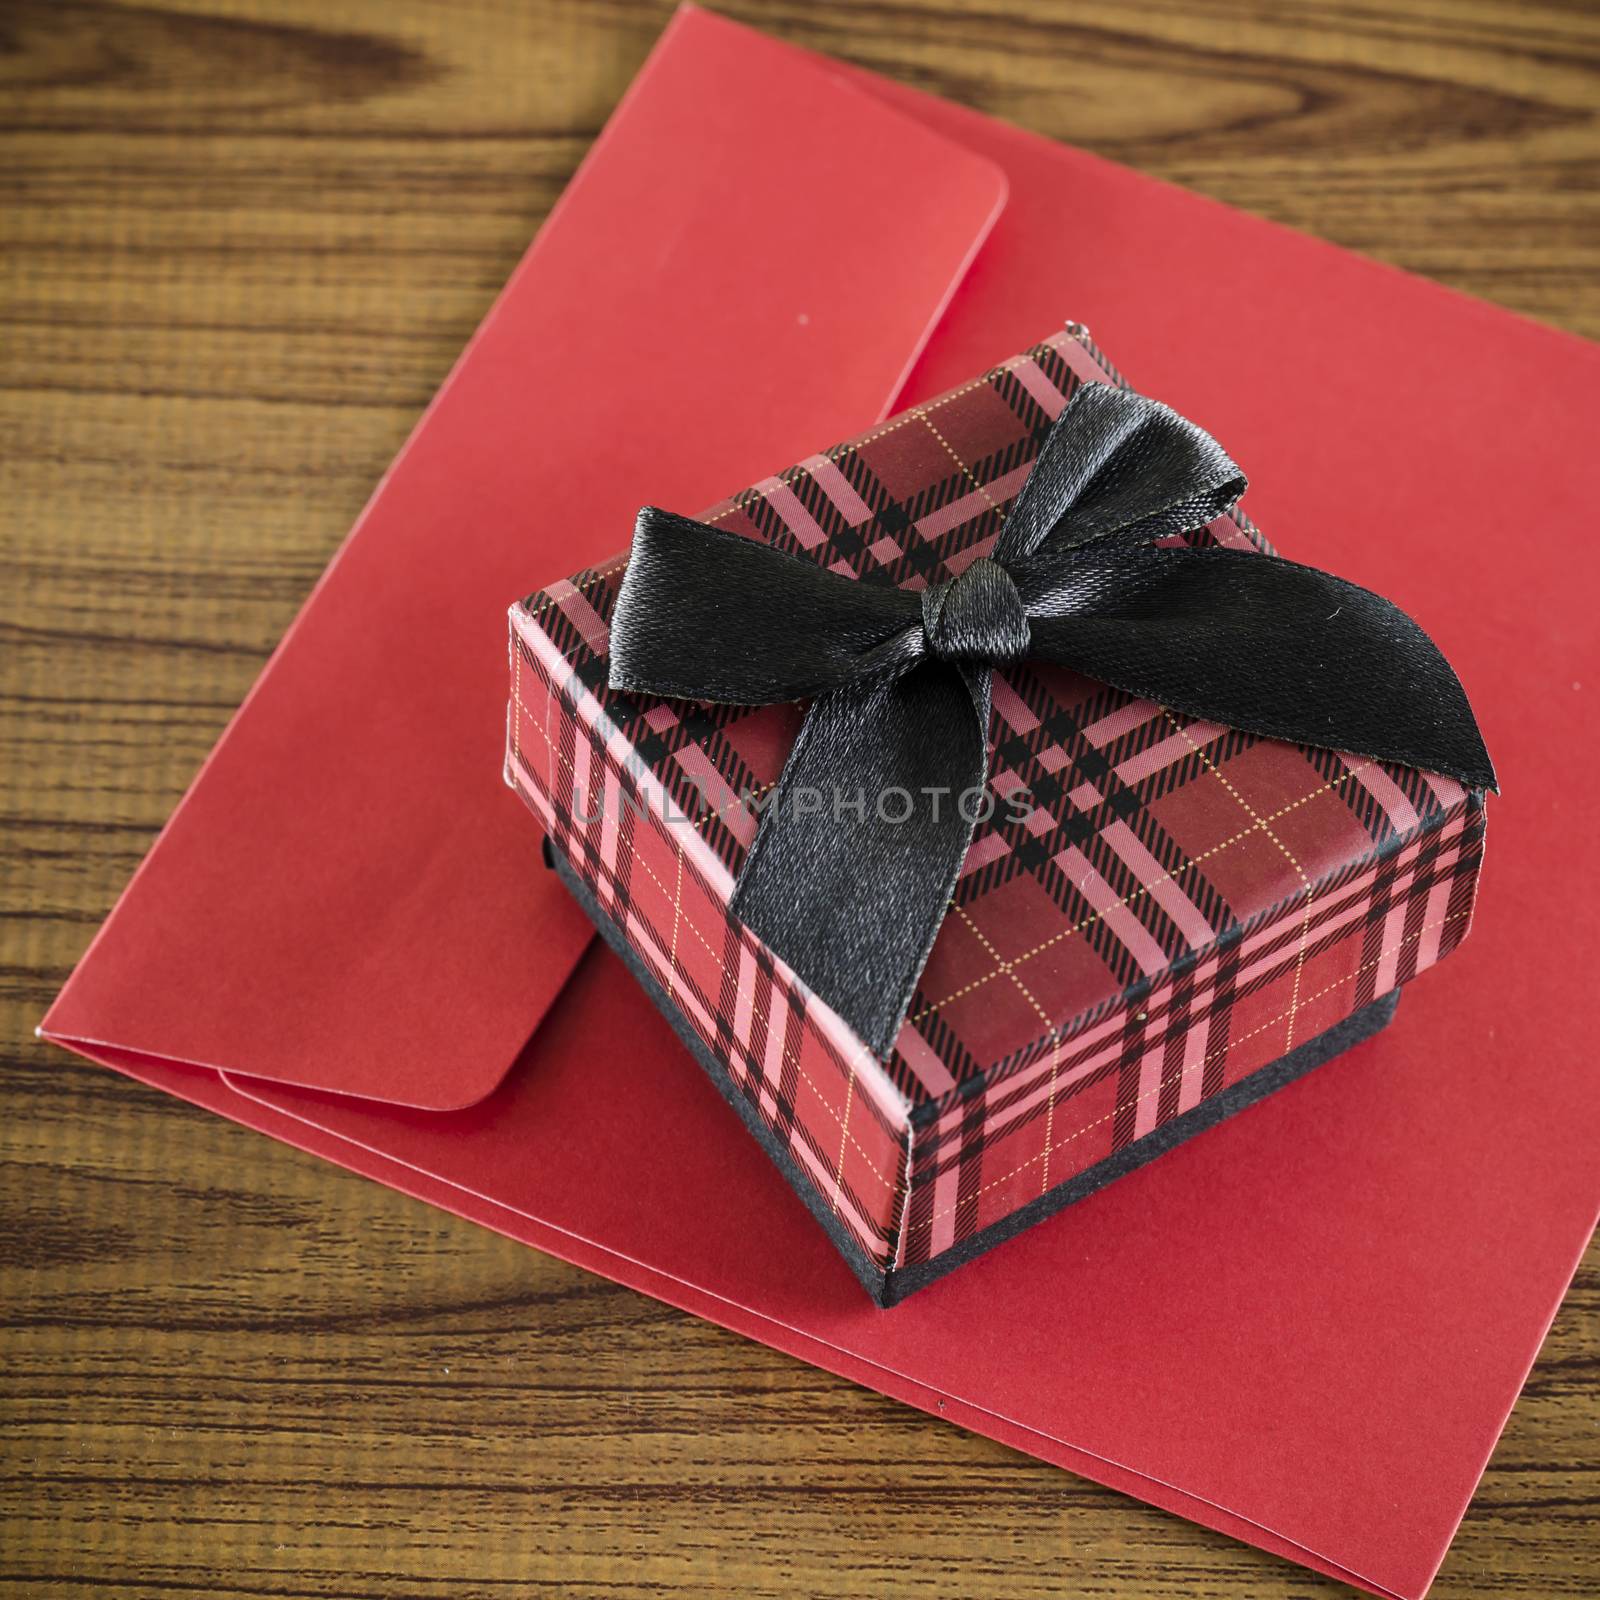 red gift box and envelope on wood background